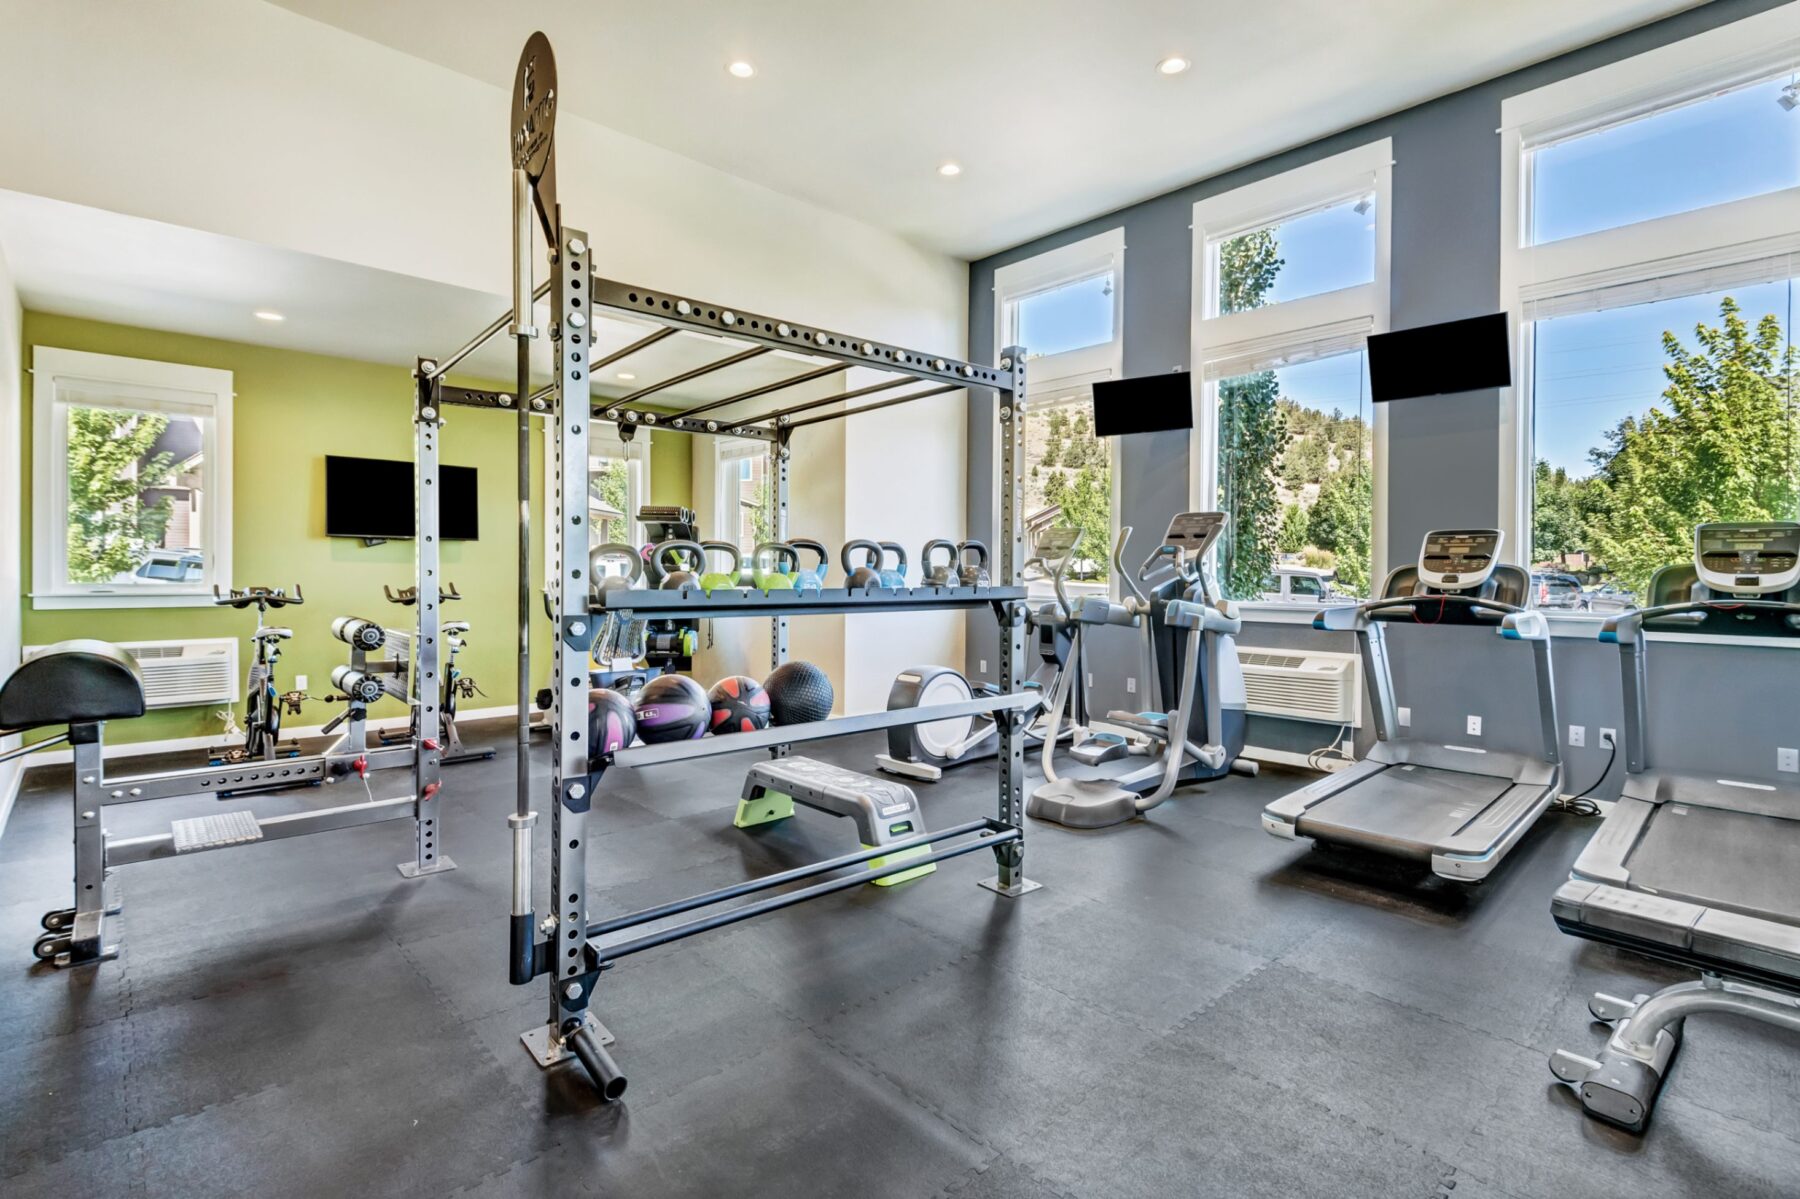 Fitness center with cardio equipment, free weights, and functional training equipment